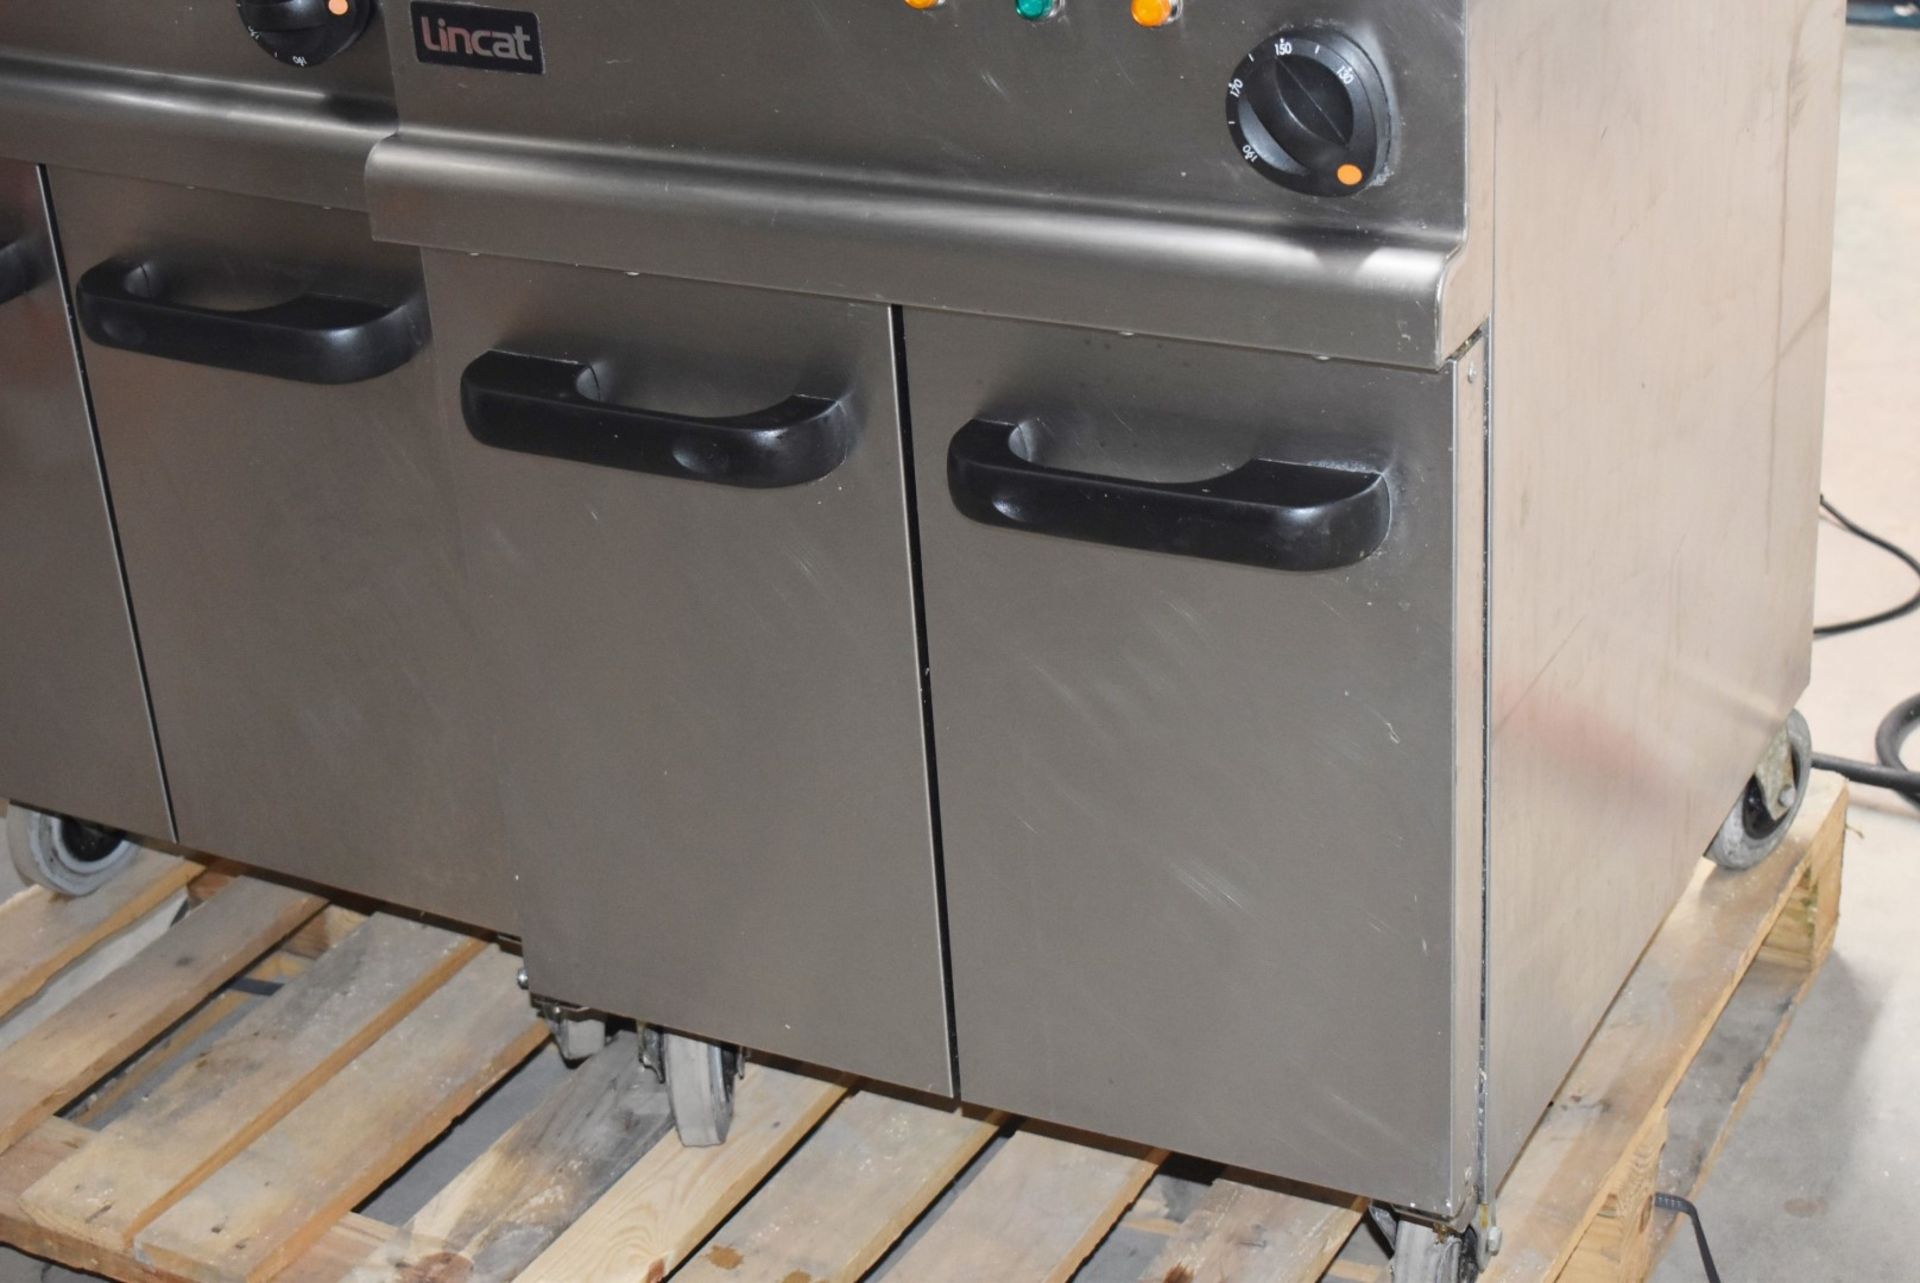 1 x Lincat Opus 700 OE7113 Single Large Tank Electric Fryer With Built In Filteration - 240V / 3PH P - Image 8 of 11